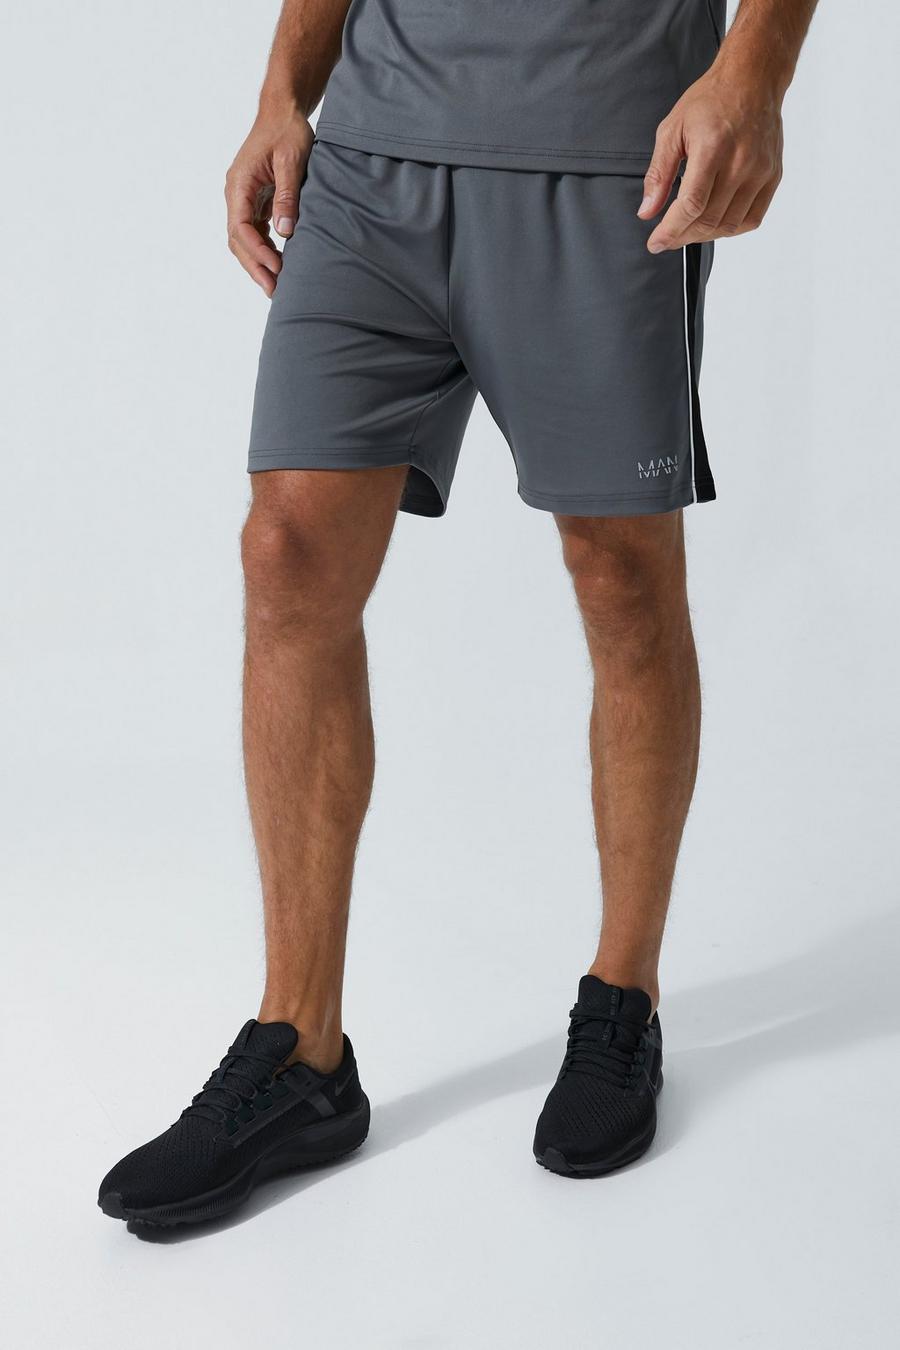 Tall Man Active Performance Trainings-Shorts, Charcoal gris